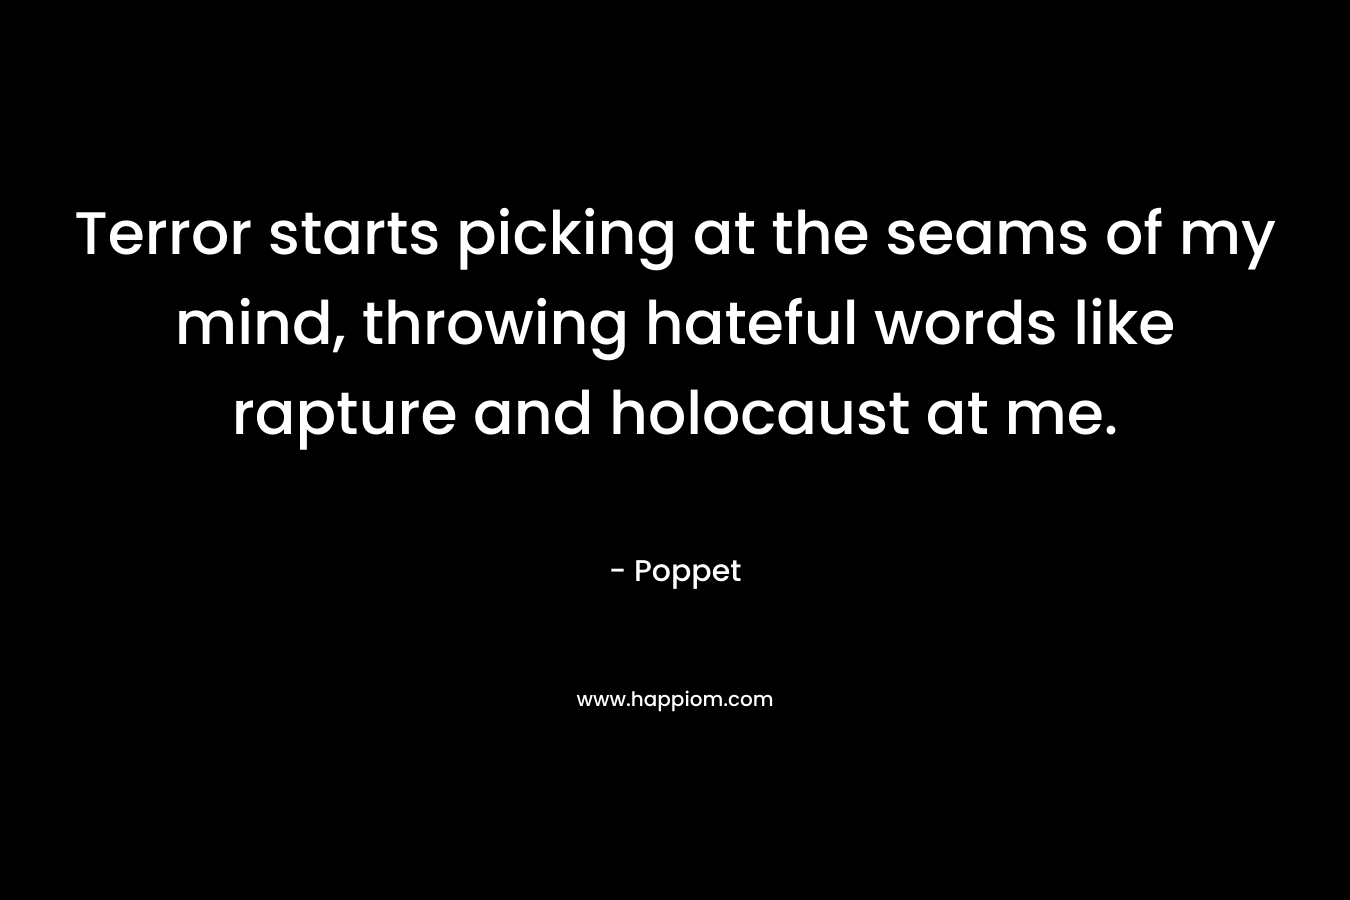 Terror starts picking at the seams of my mind, throwing hateful words like rapture and holocaust at me. – Poppet